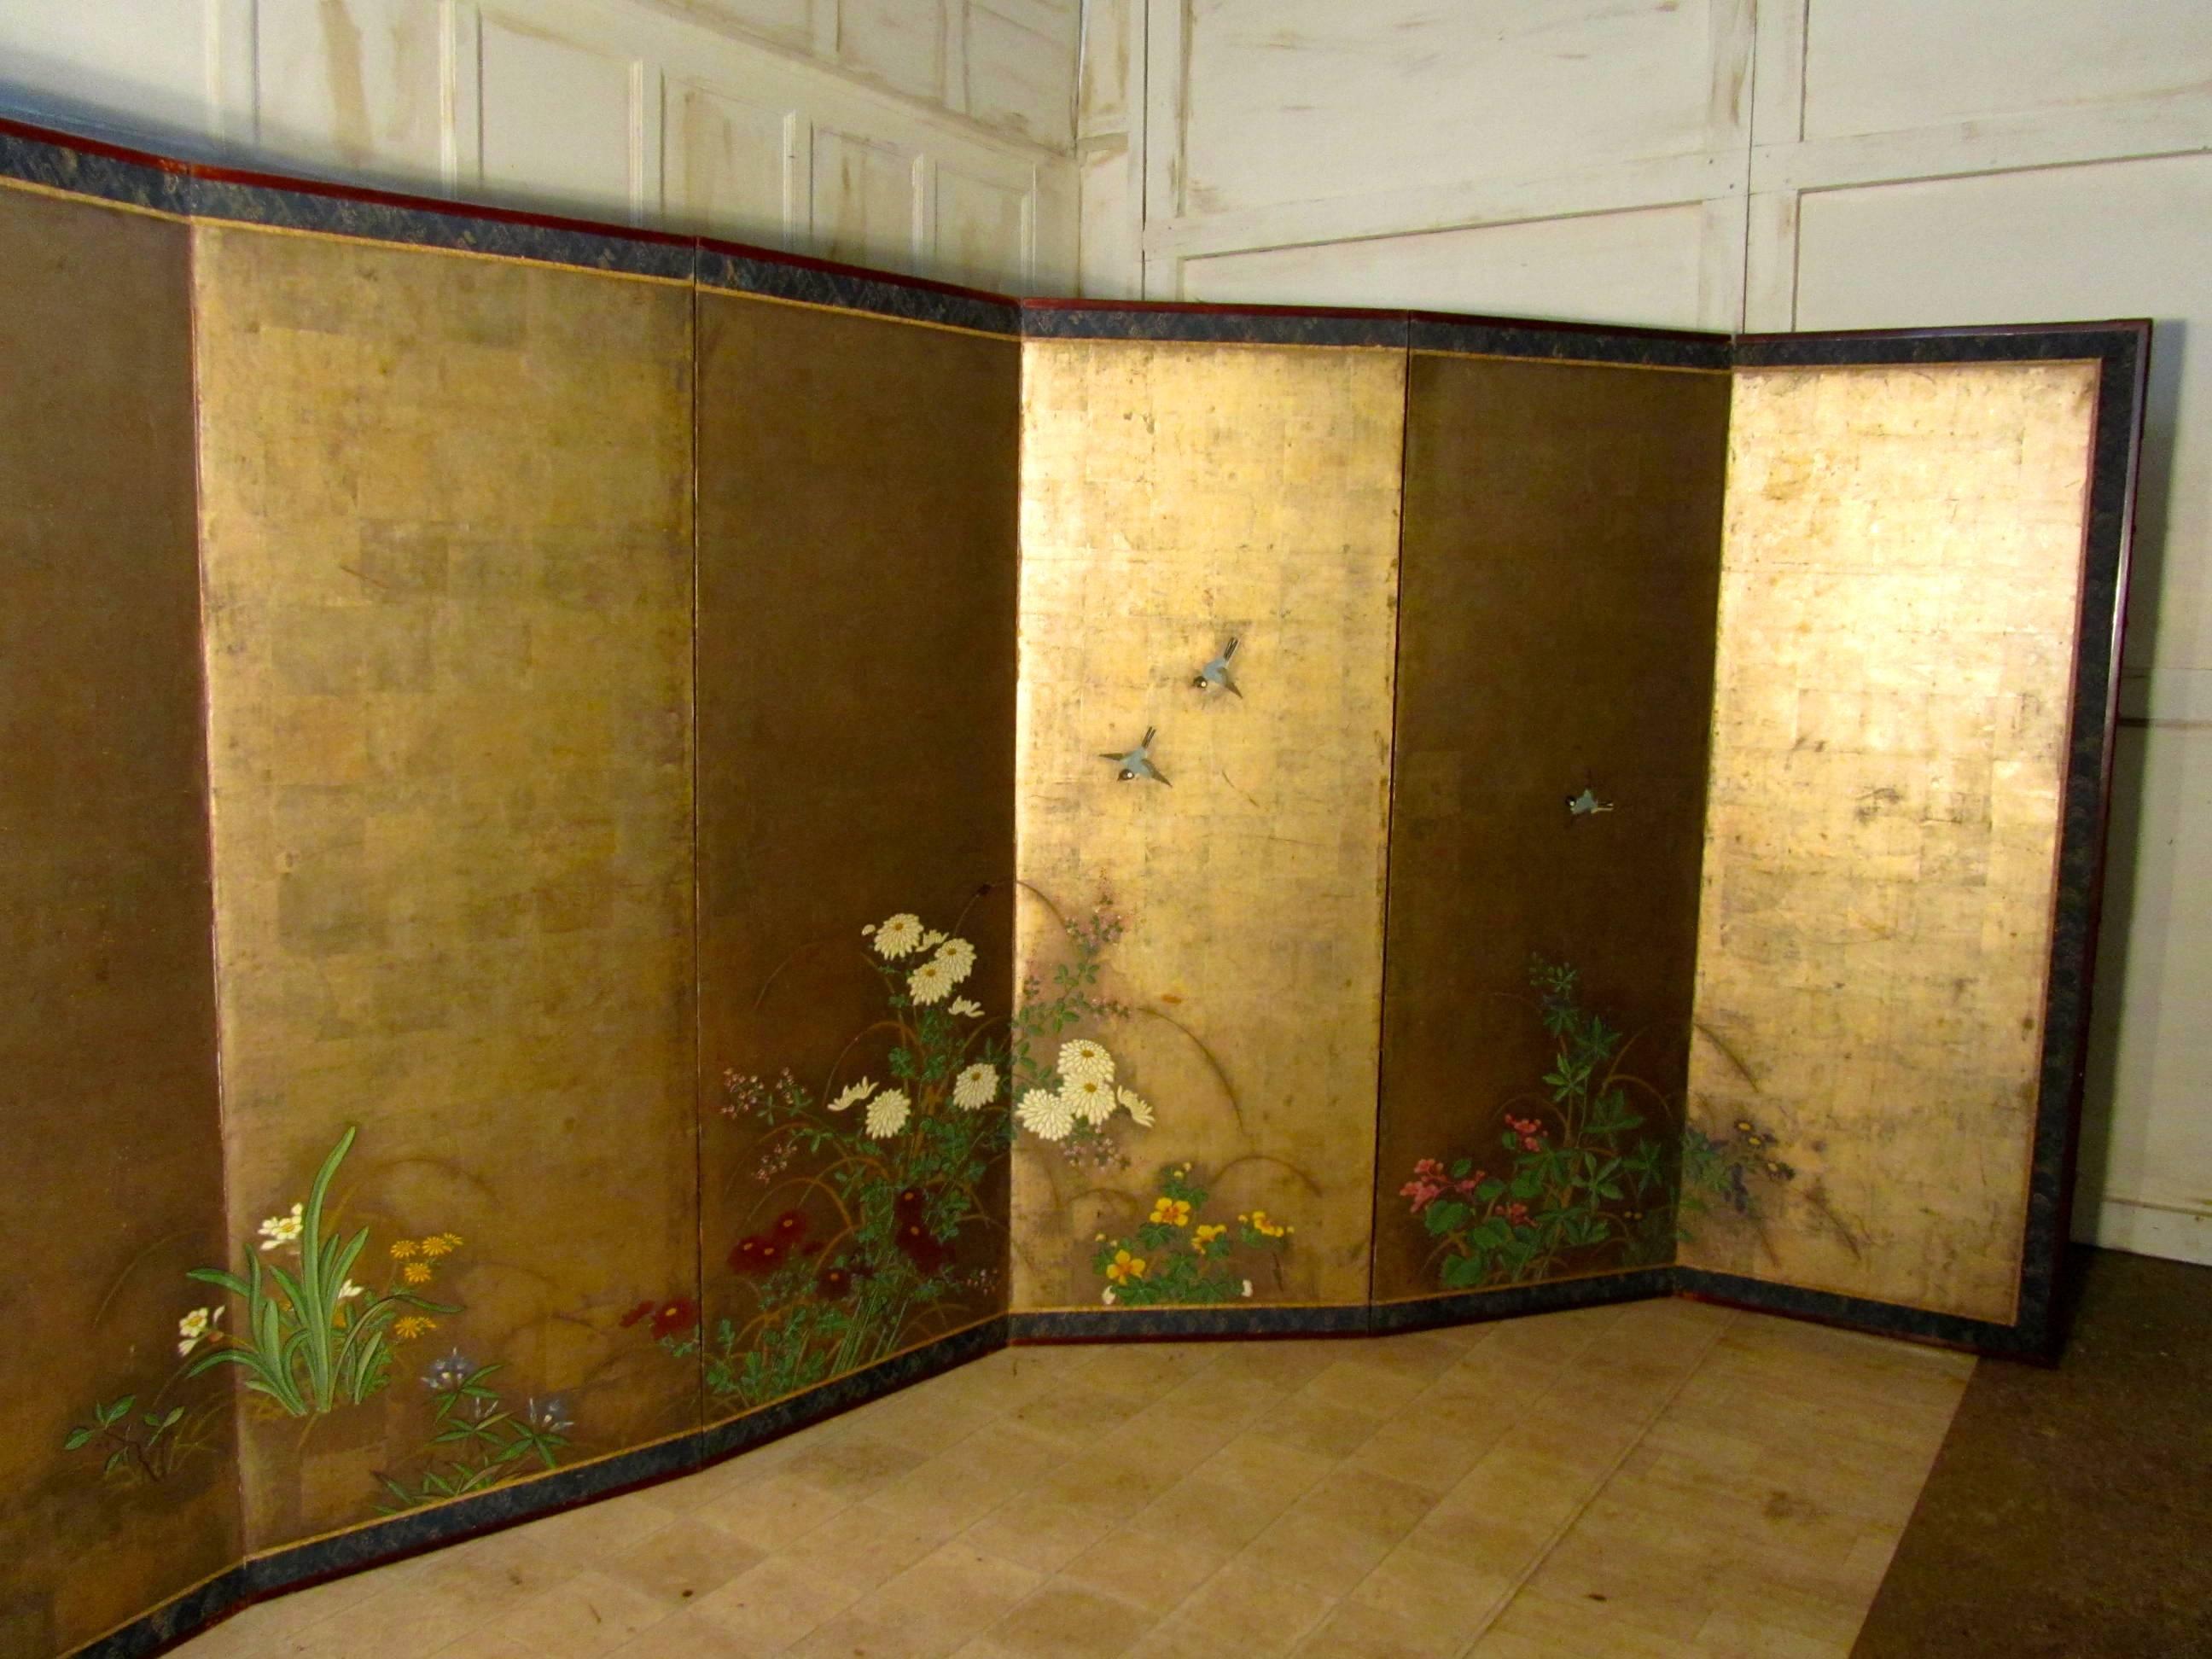 A pair of 18th century gold and painted Japanese six fold screens, (Byobu) Edo period. These are a very rare pair of large Japanese screens, the screens are each six fold and have been provided with clips which join them to make a 12 fold screen The